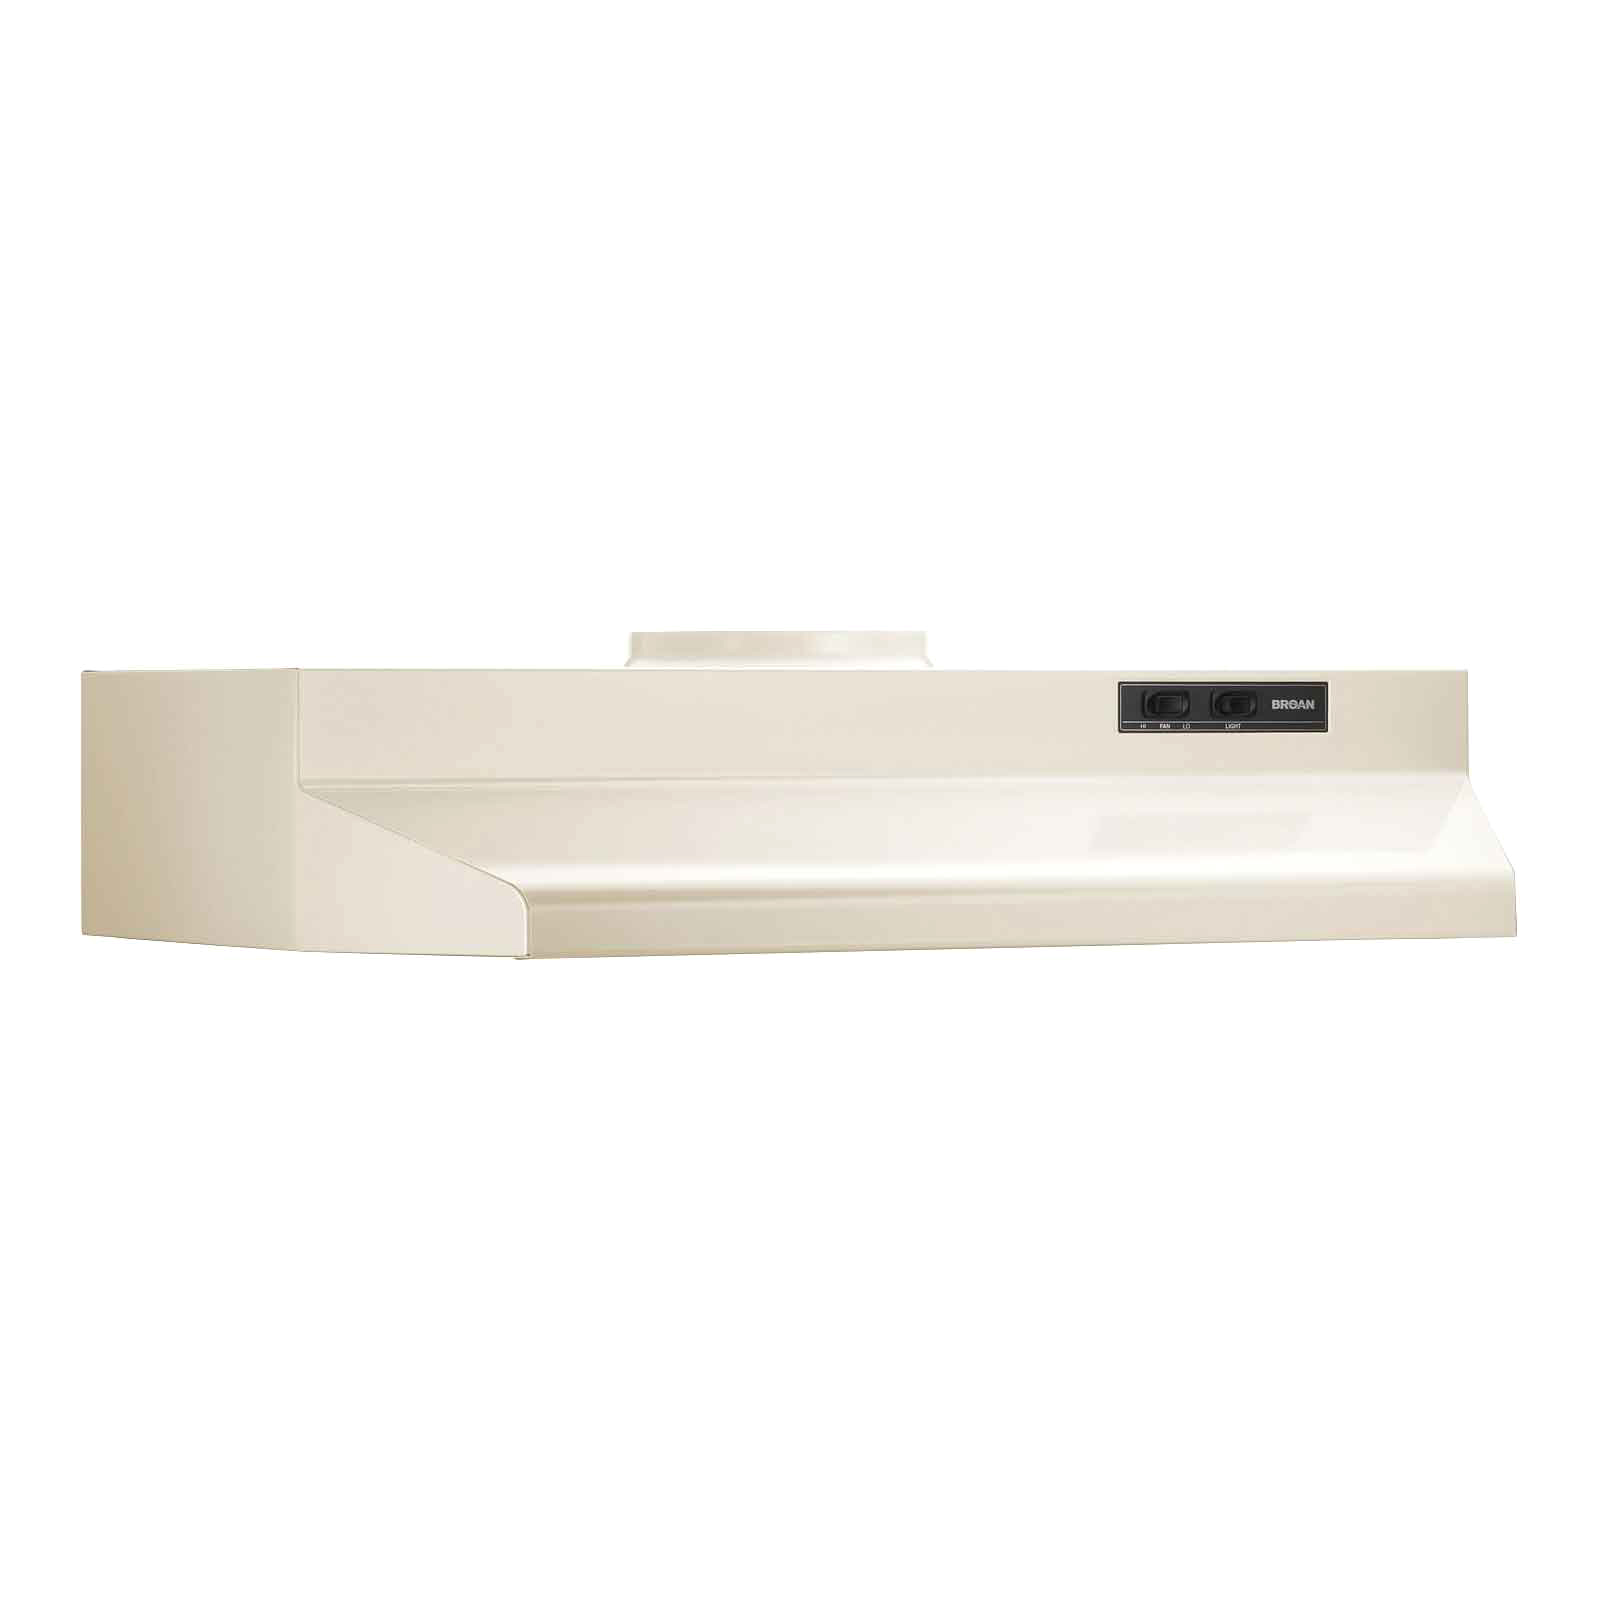 Broan 412401 24" 2-Speed Non-Ducted Under-Cabinet Range Hood - White